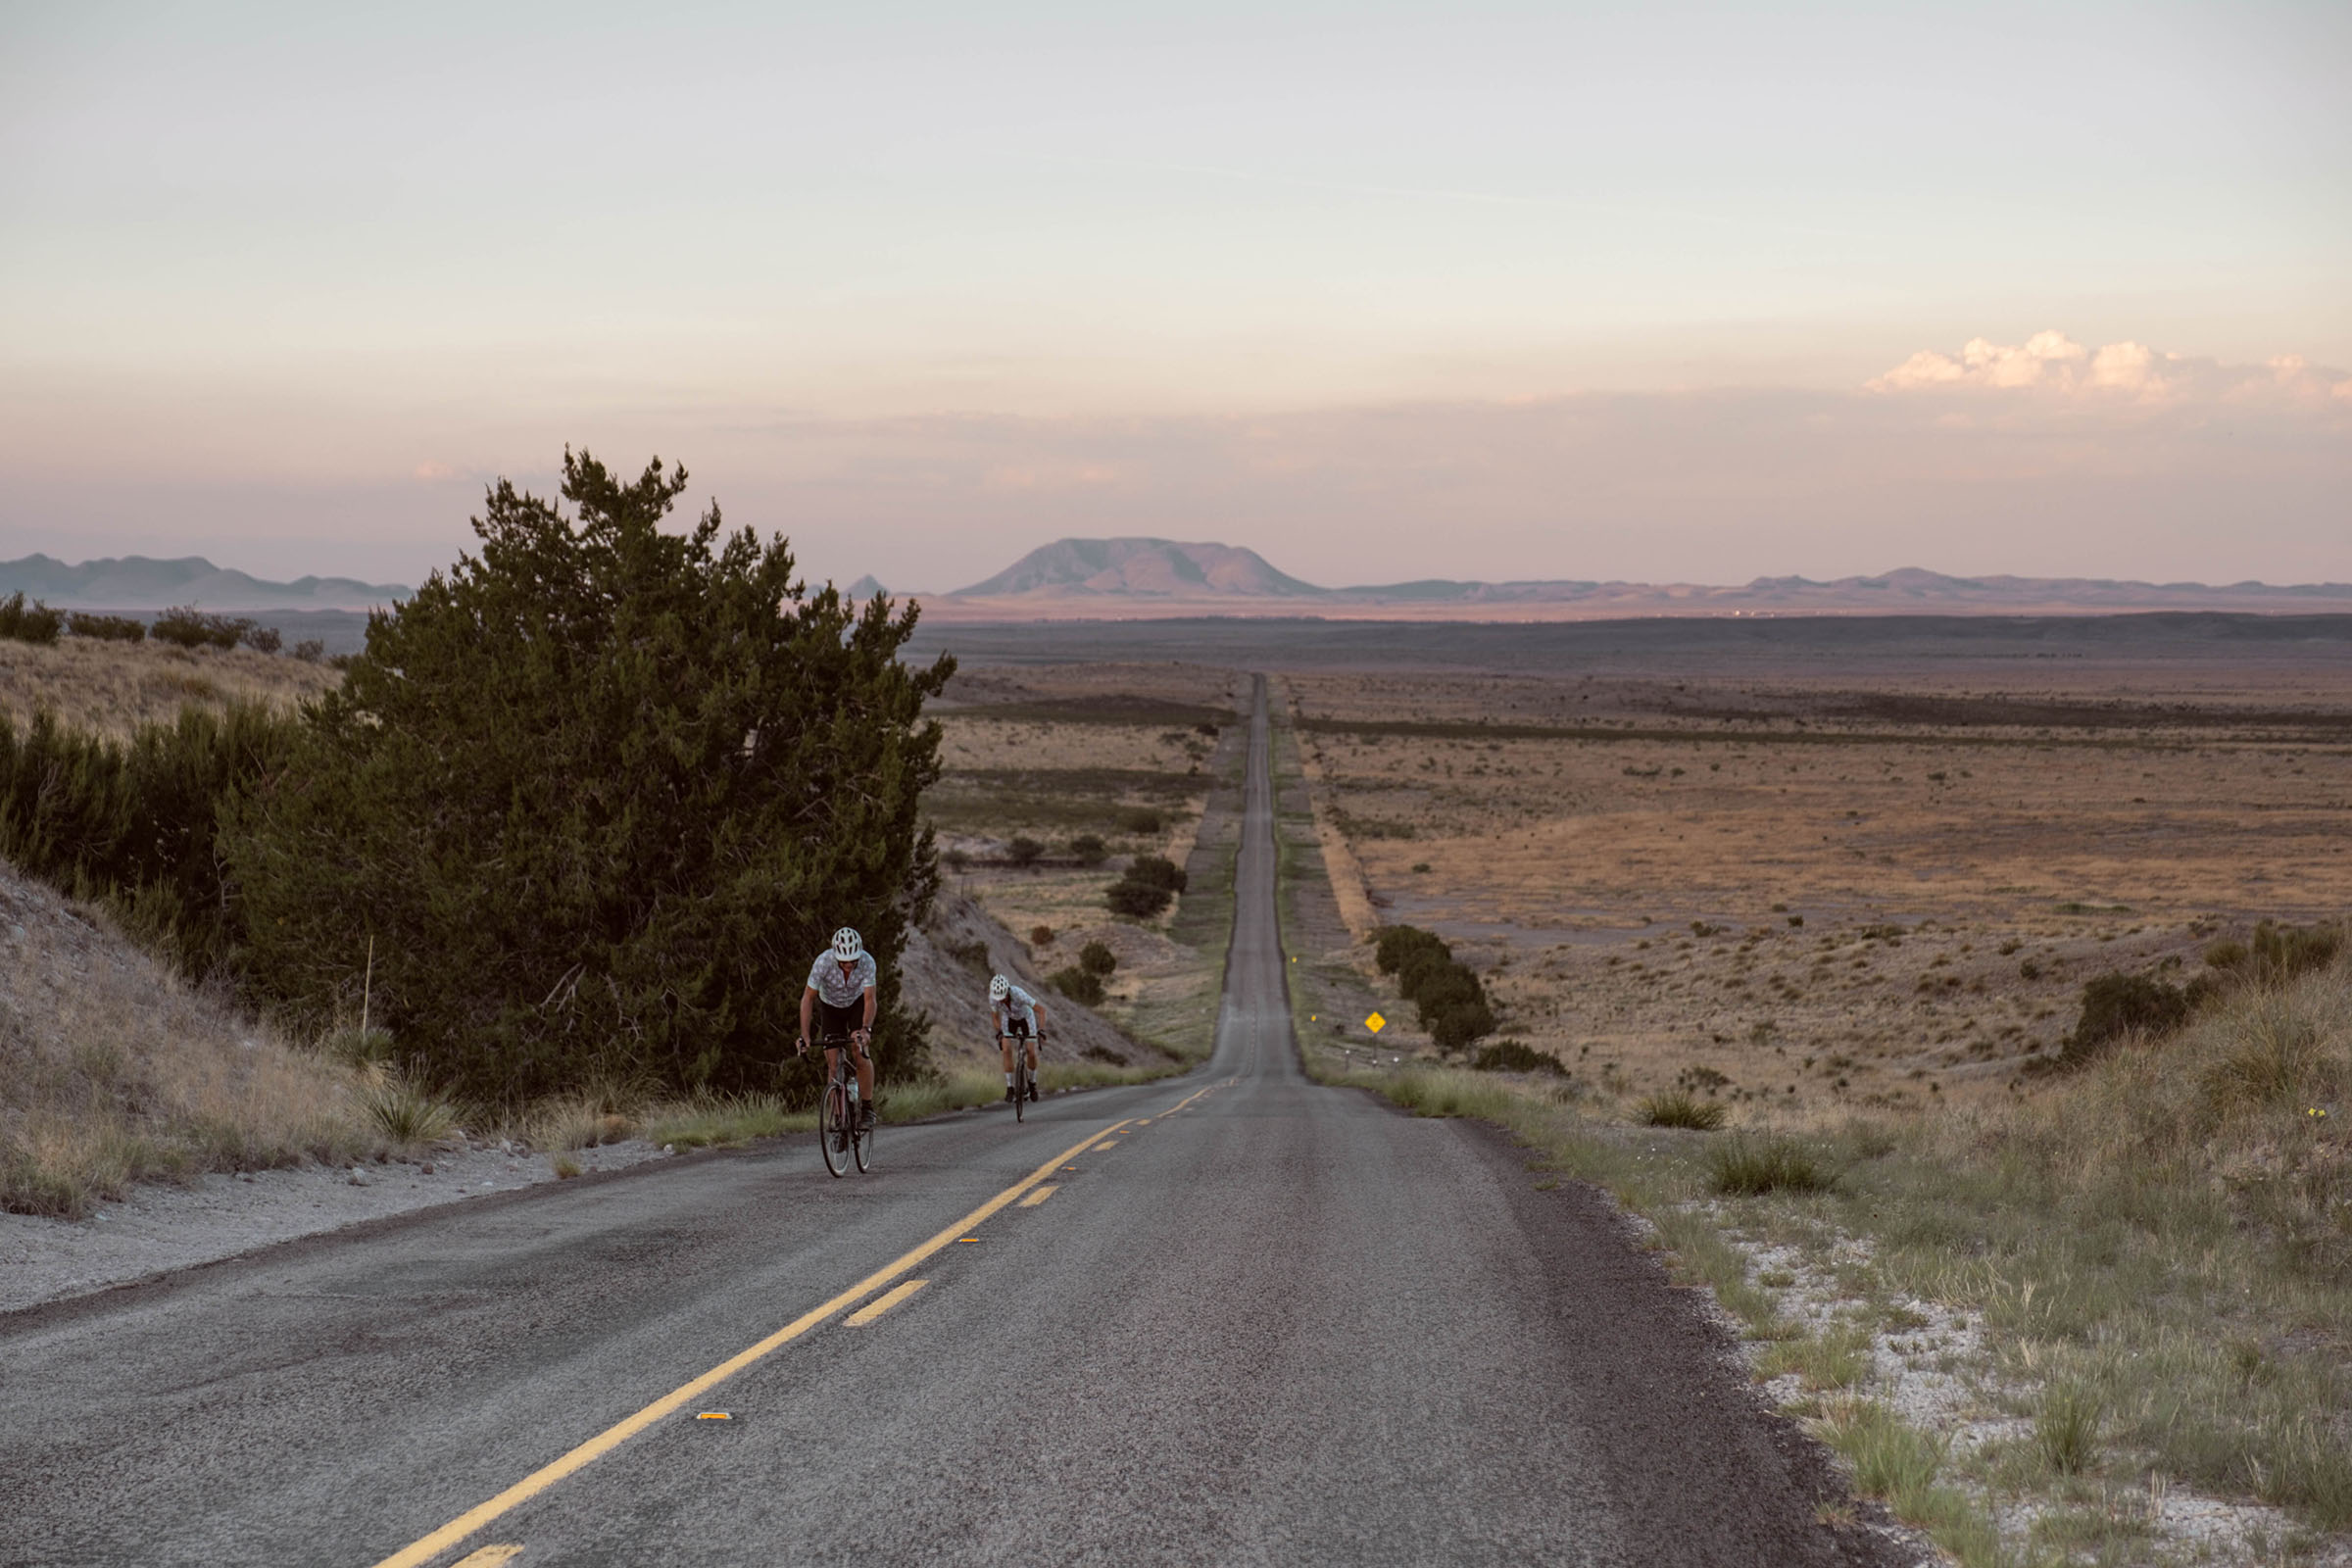 A group of cyclists ride along a desert road with mountains in the background